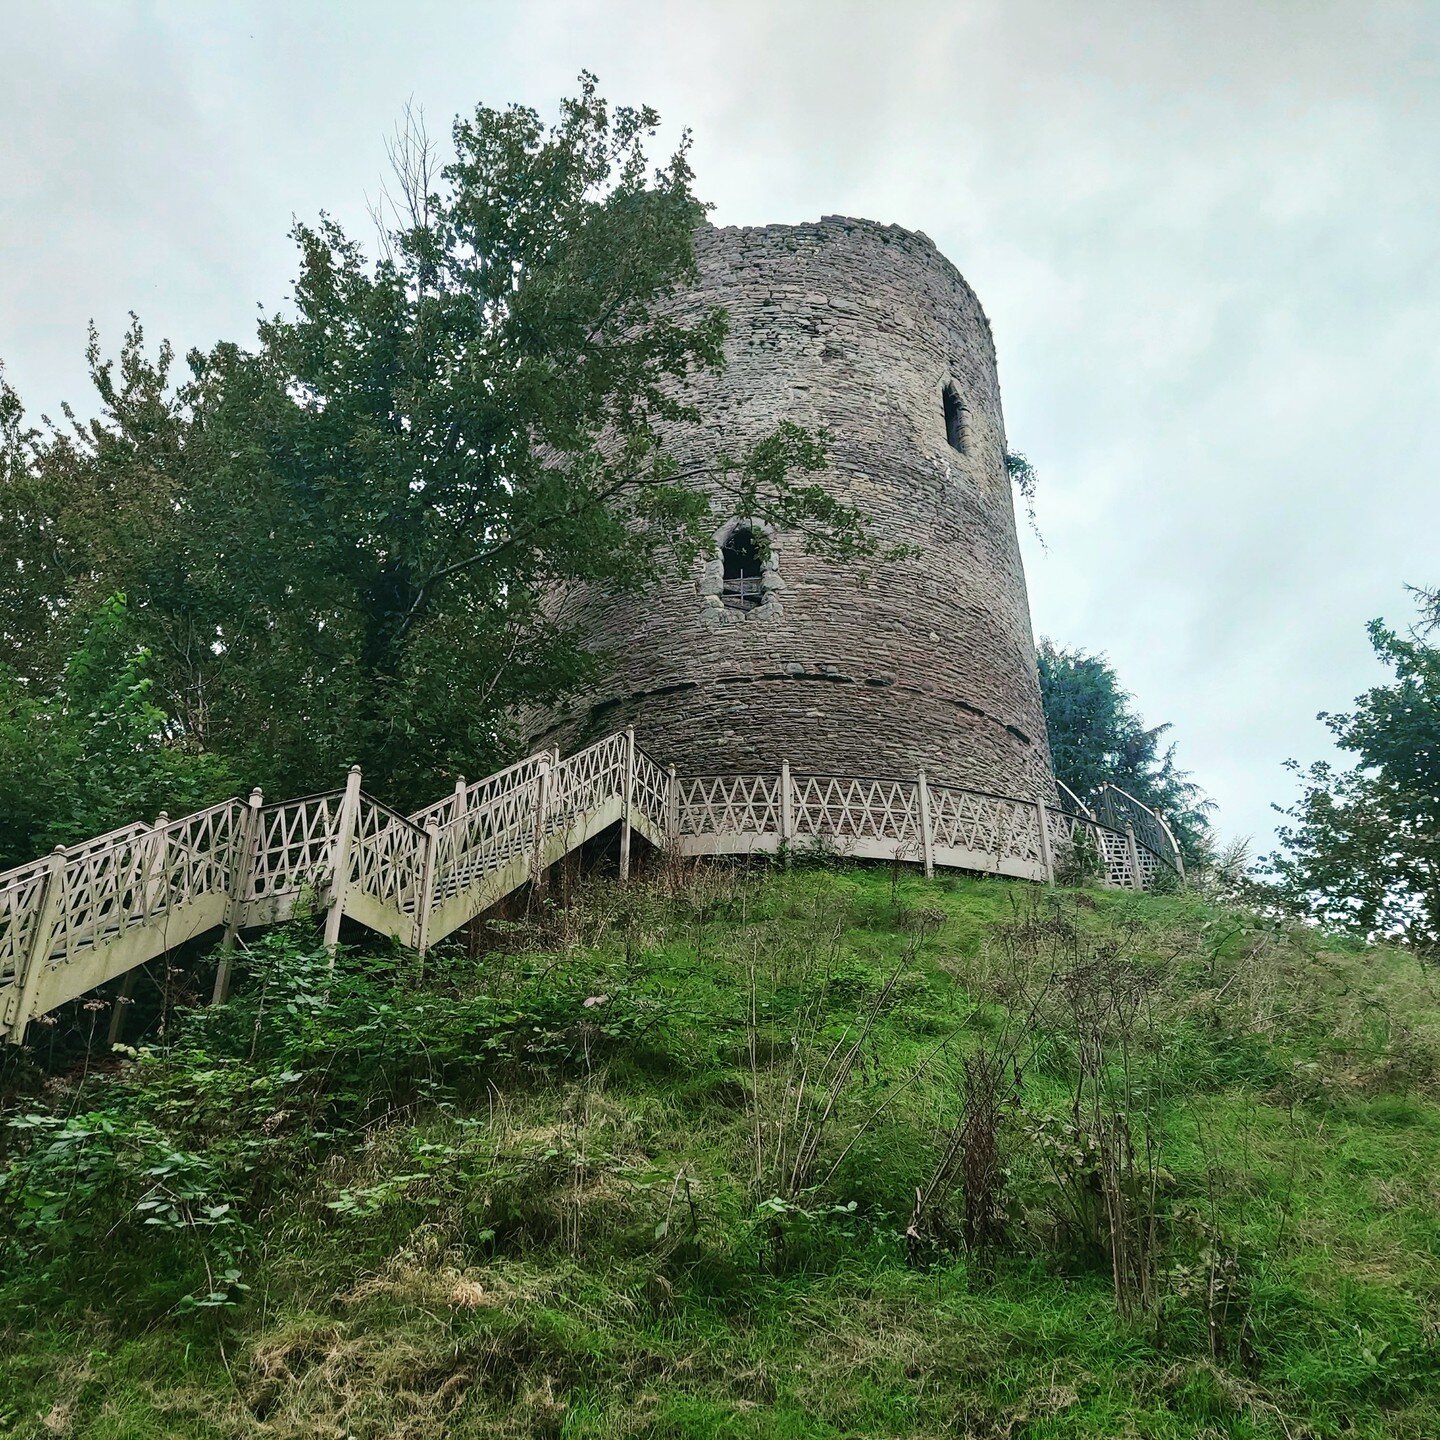 Bronllys Castle: Located in Marches territory, this castle was originally built in the late 12th Century, when it would have started as a wooden keep built on a bailey put in place by Norman Robert Fitz Pons. One of the earliest records of the castle